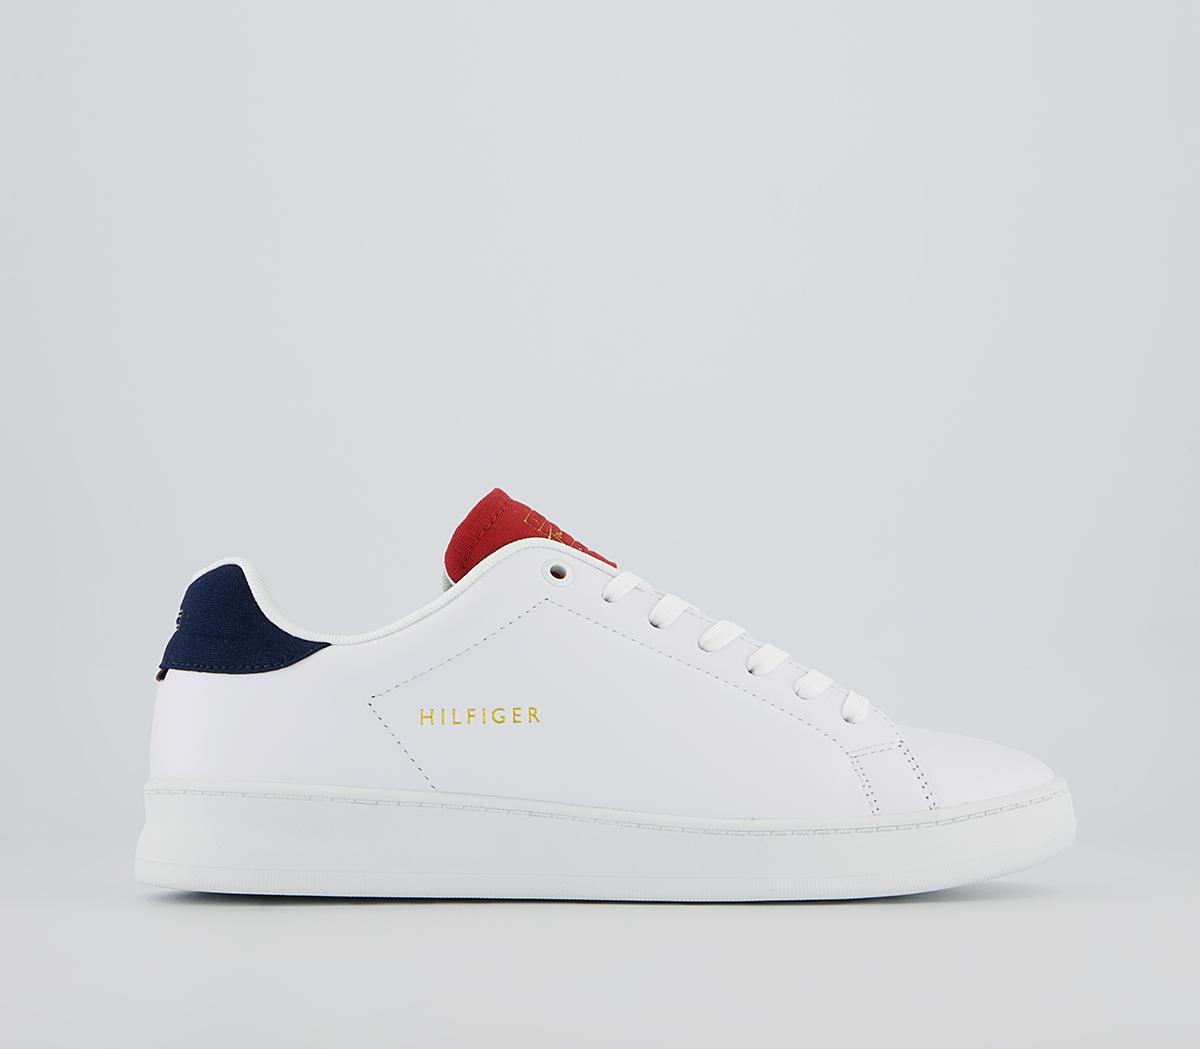 Tommy Hilfiger Retro Trainers White Red Blue - Men's Casual Shoes